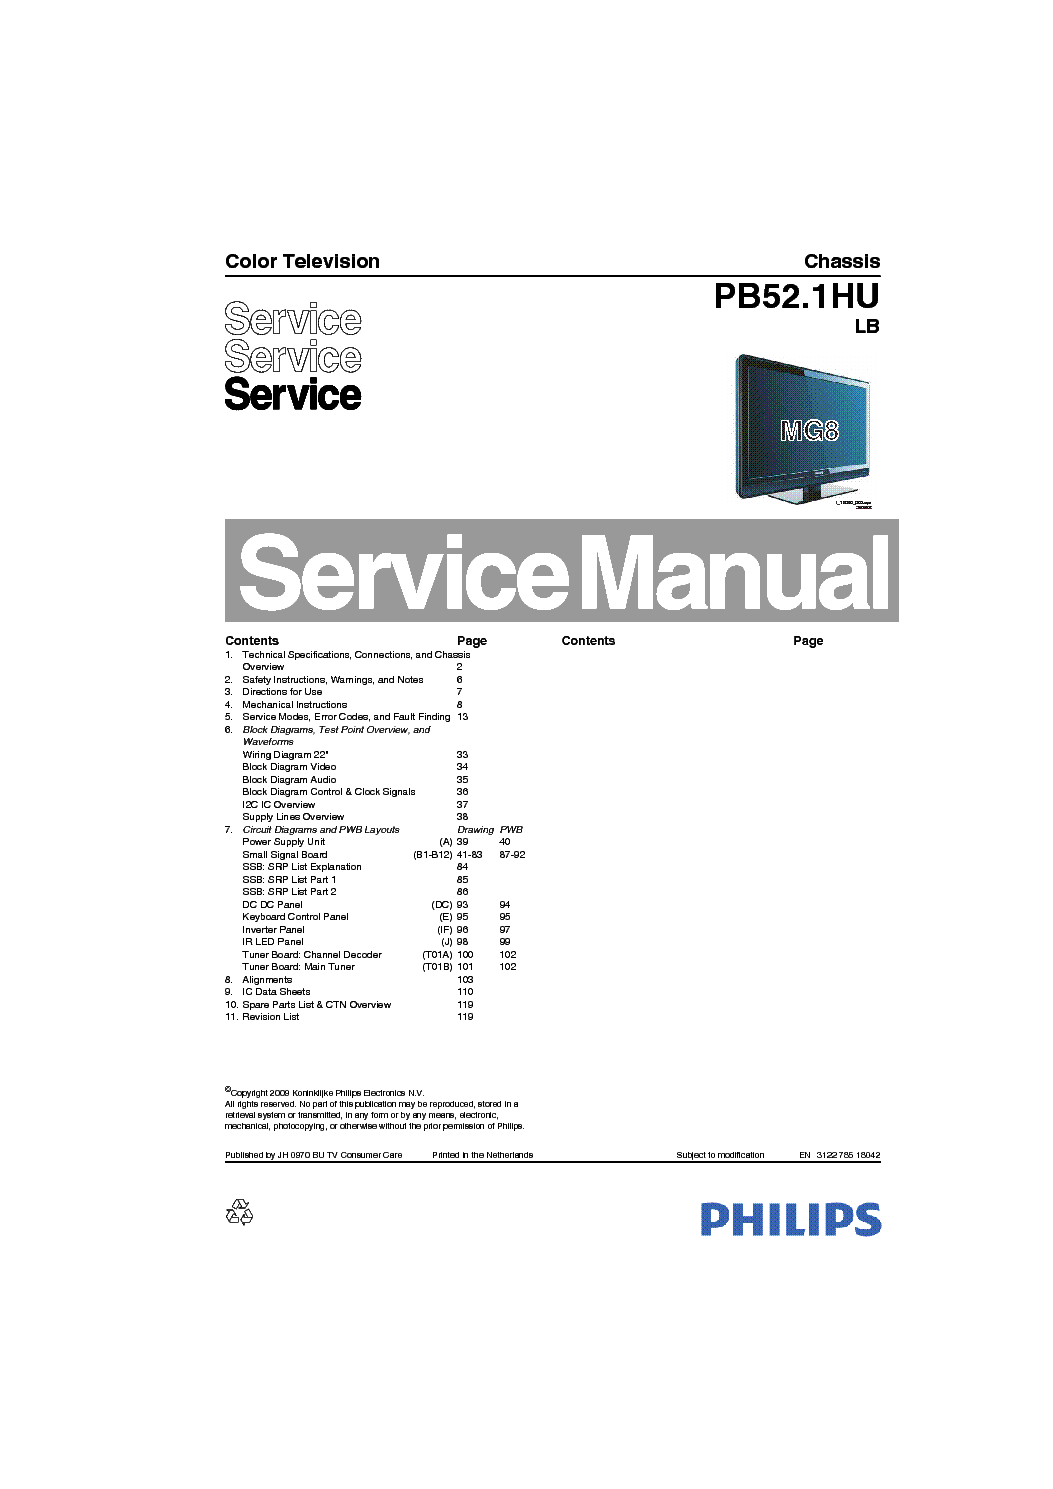 PHILIPS PB52.1HU LB CHASSIS LCD TV SM service manual (1st page)